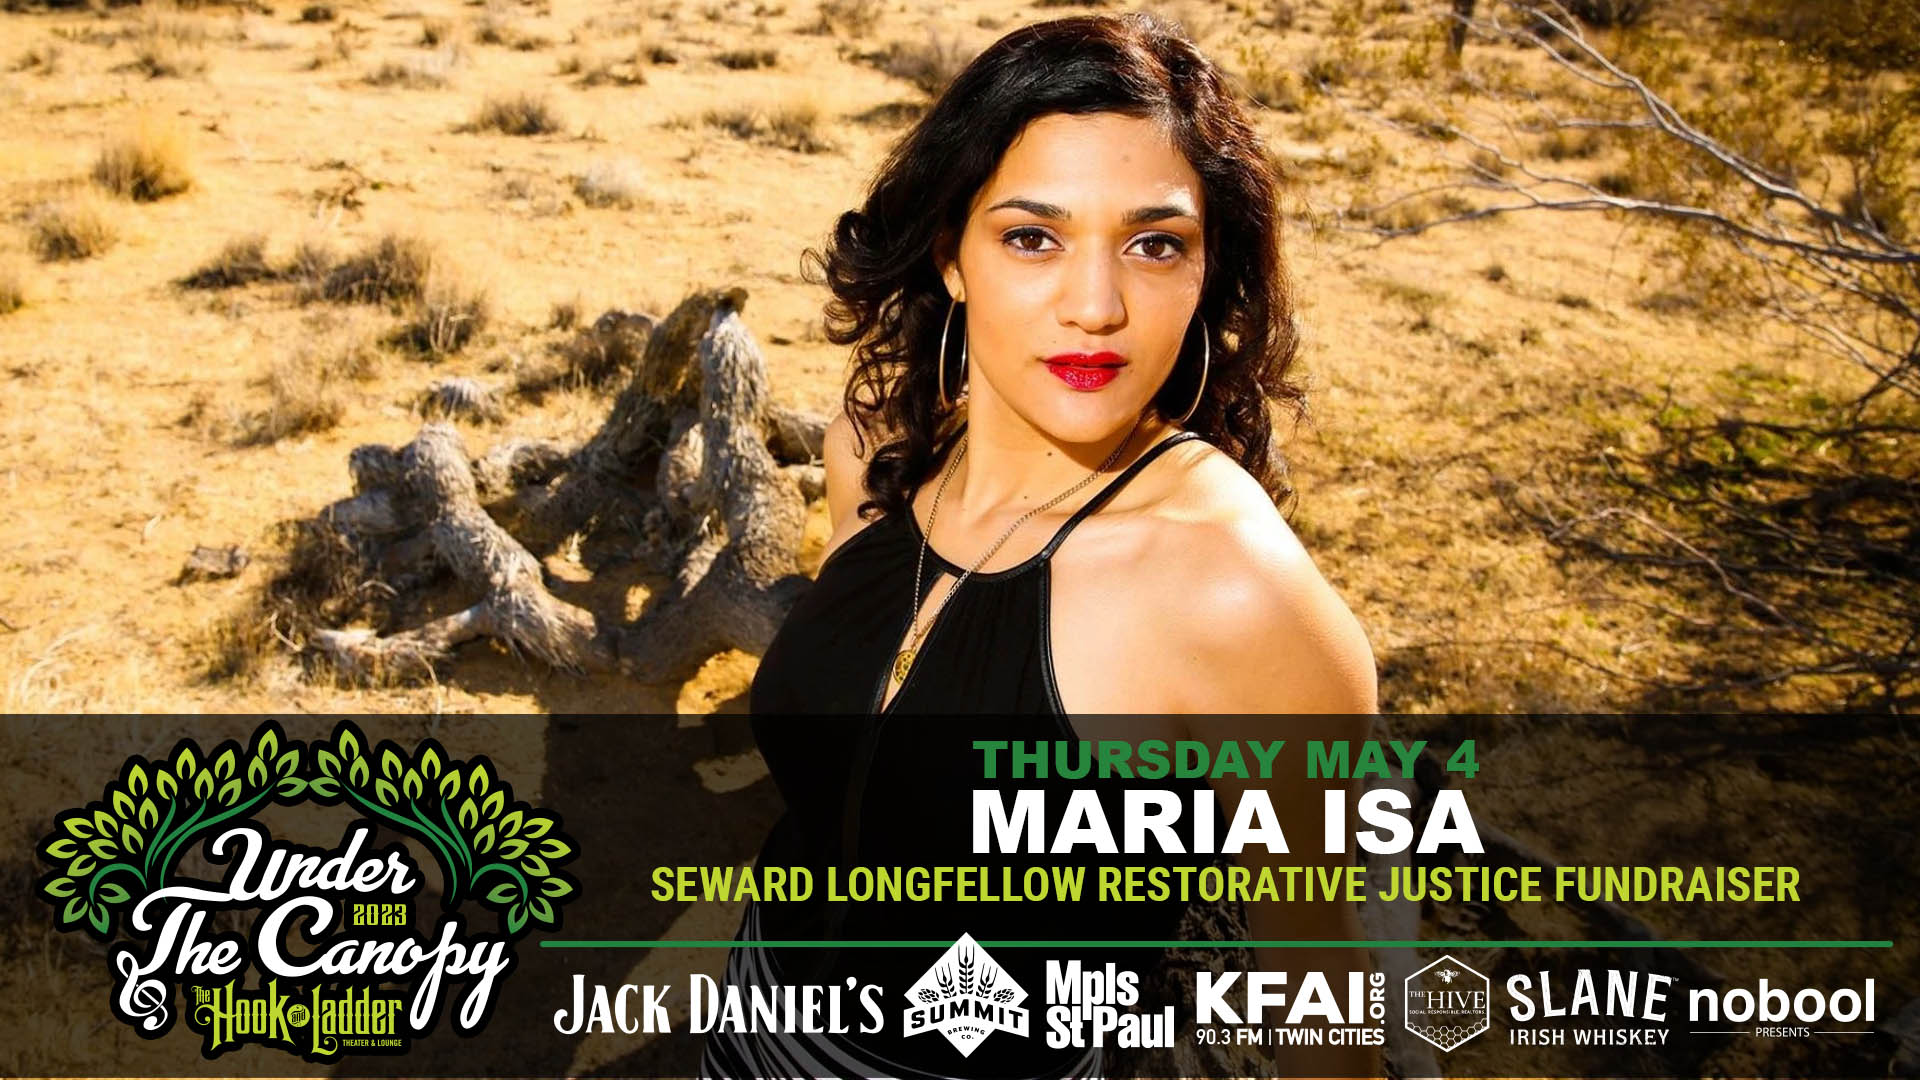 Maria Isa Seward Longfellow Restorative Justice Fundraiser Thursday, May 4 Under The Canopy at The Hook and Ladder Theater "An Urban Outdoor Summer Concert Series" Doors 6:00pm :: Music 7:00pm :: 21+ GA: $20 ADV / $26 DOS